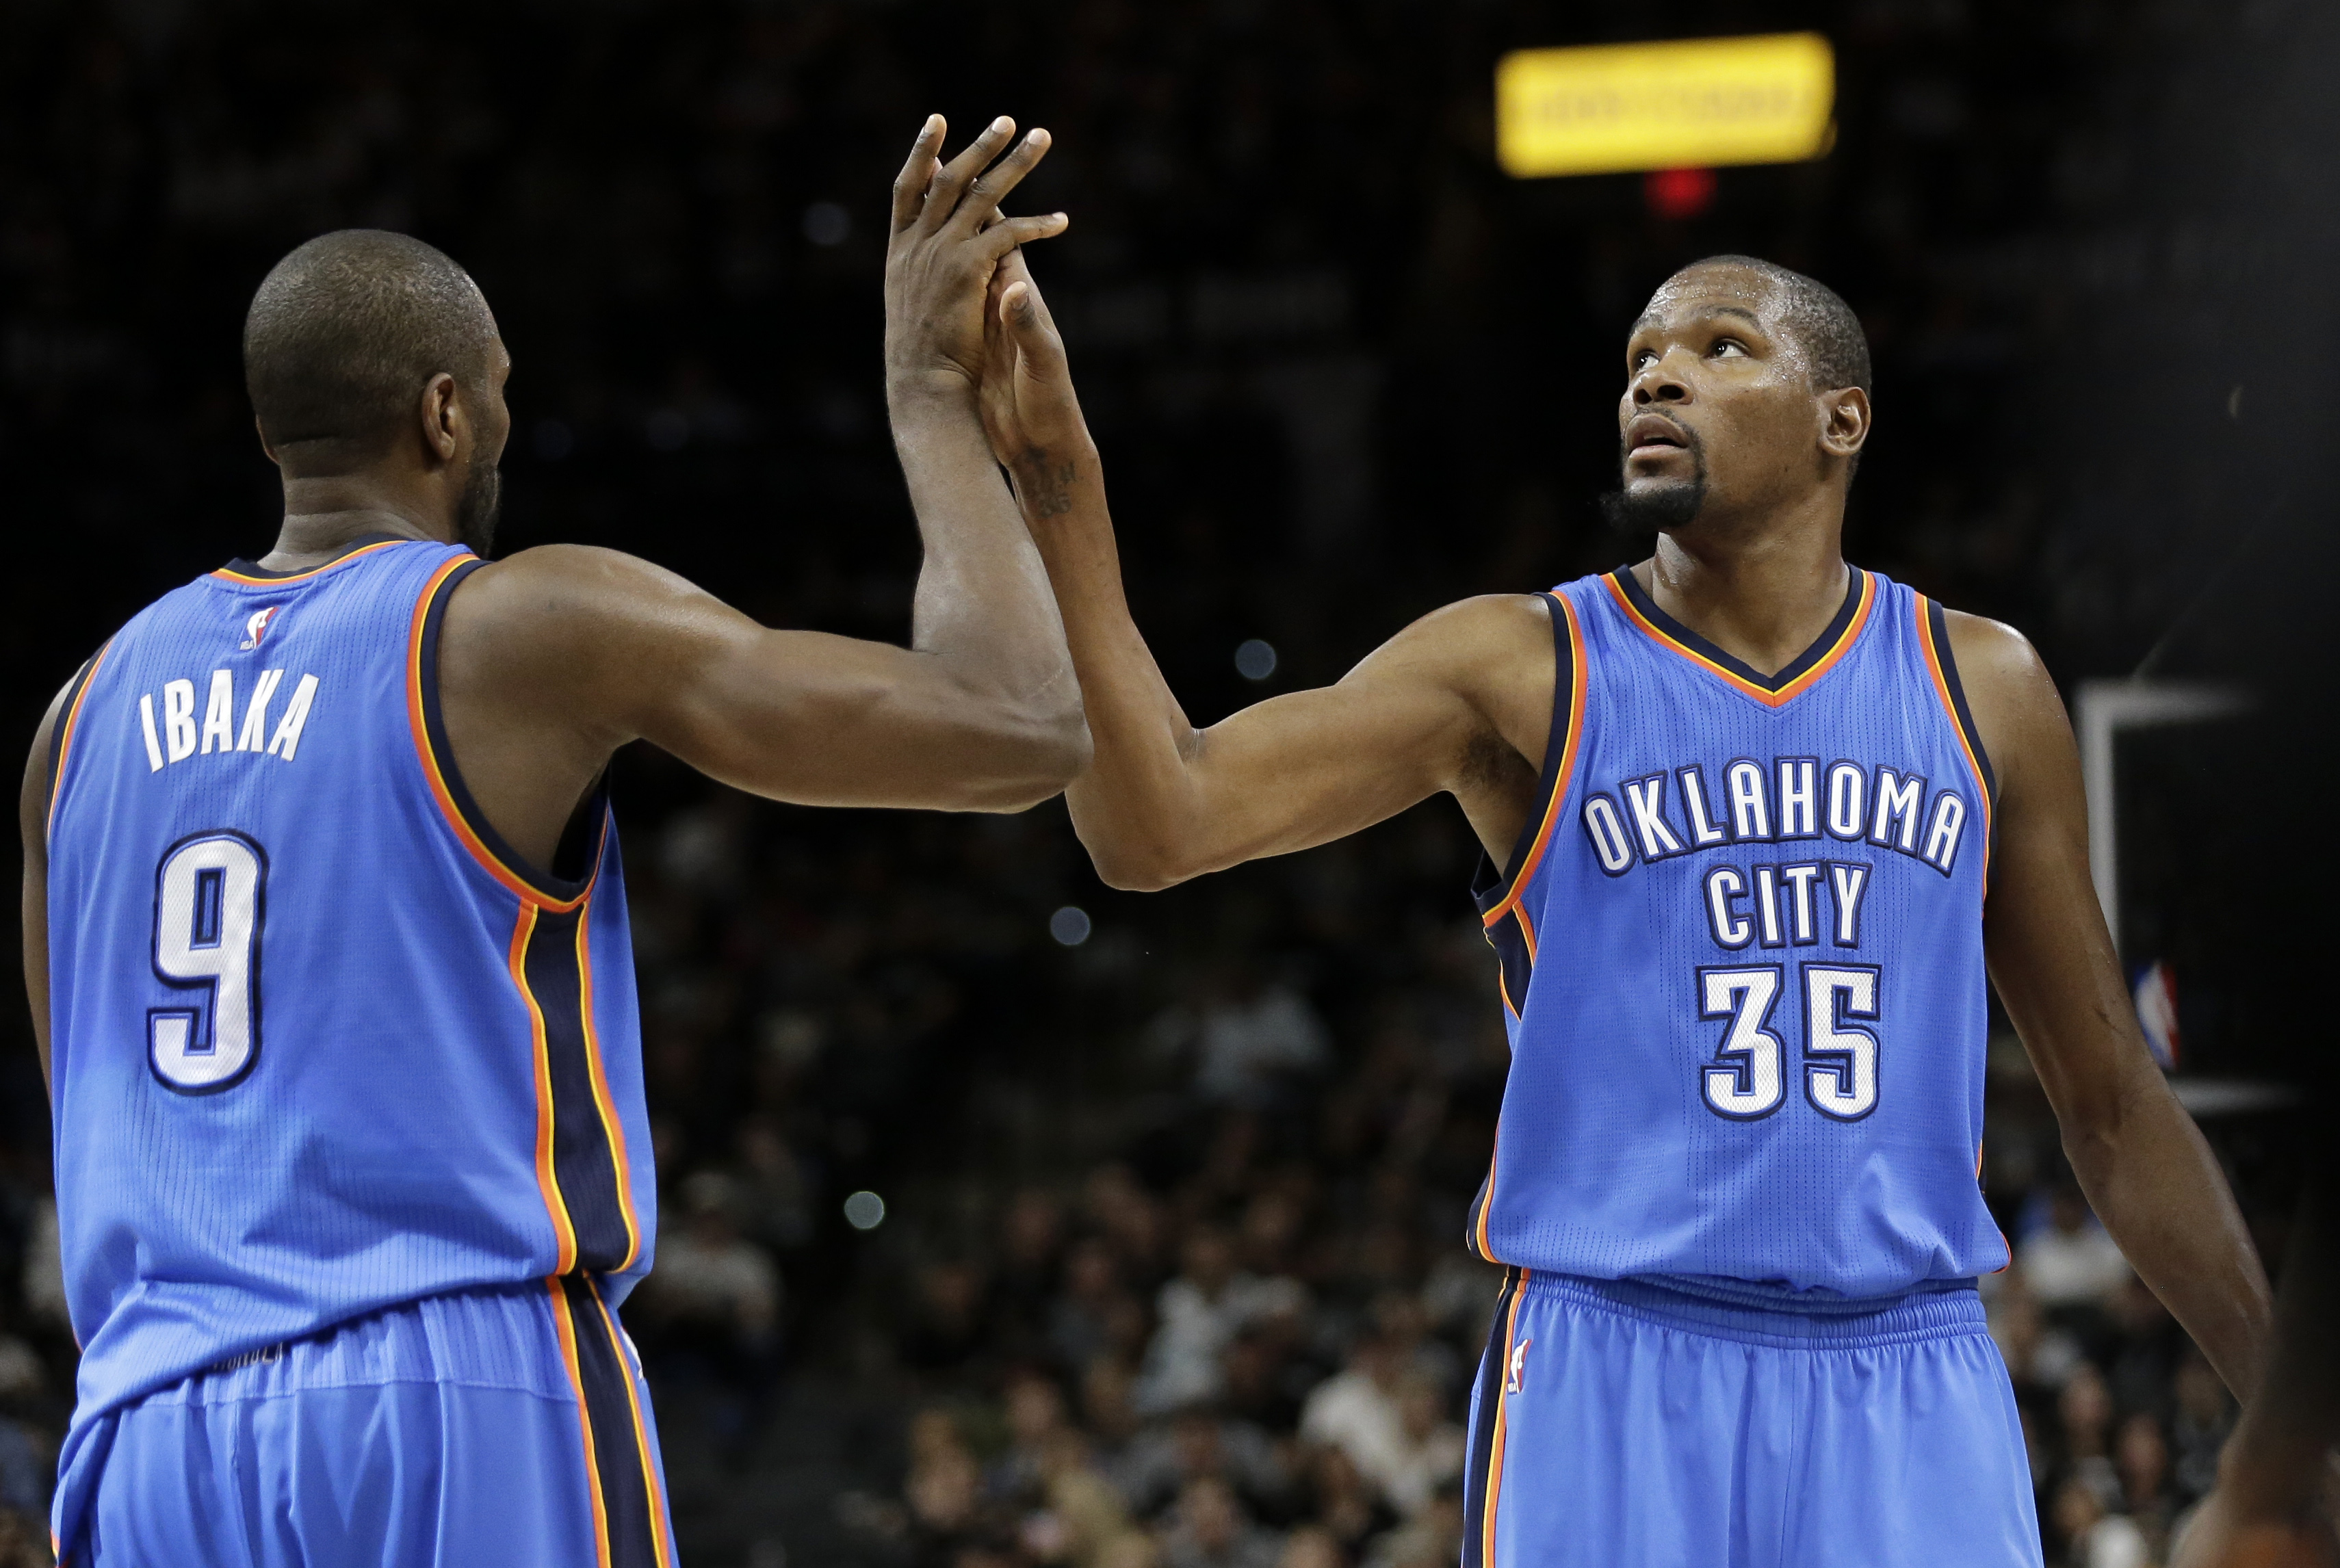 Kevin Durant says he's 7-feet tall, but only when talking to women